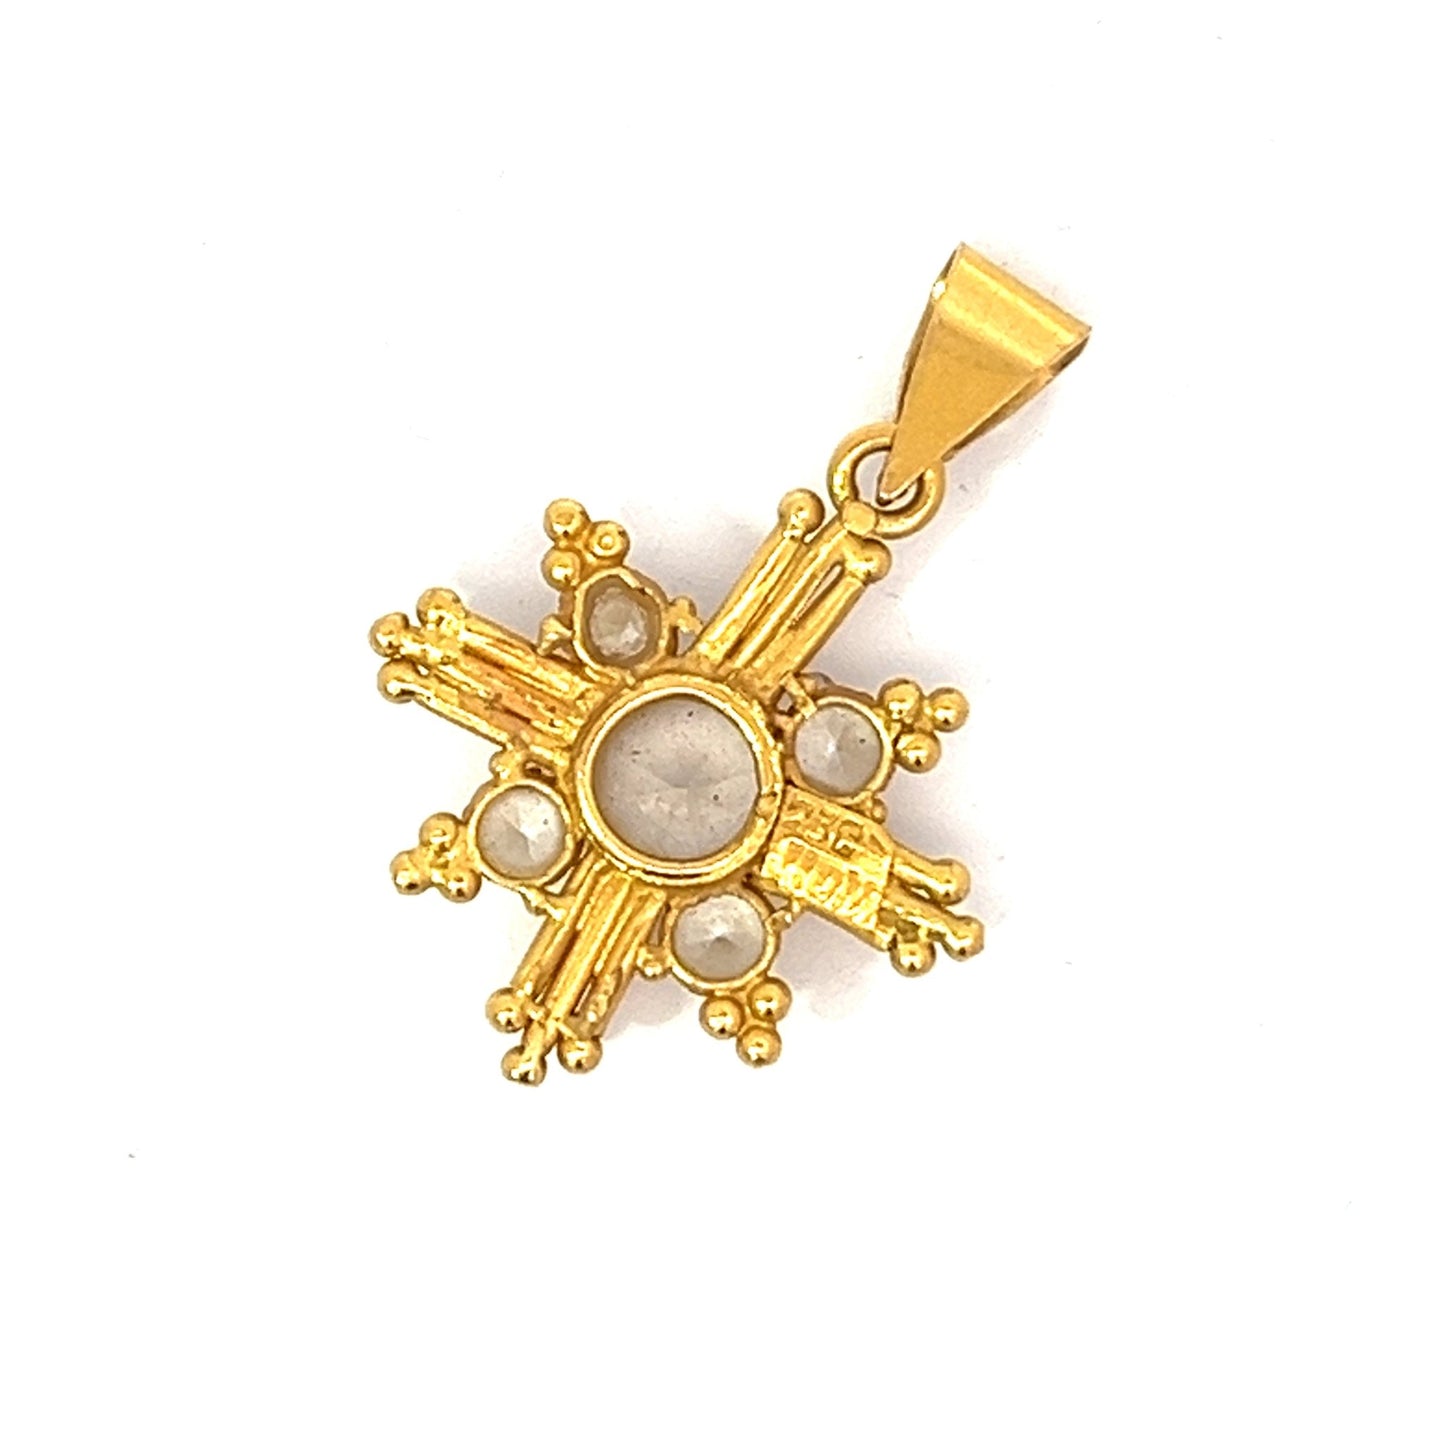 21ct solid gold cross pendant with cubic zirconia stone 01002313RetroGold